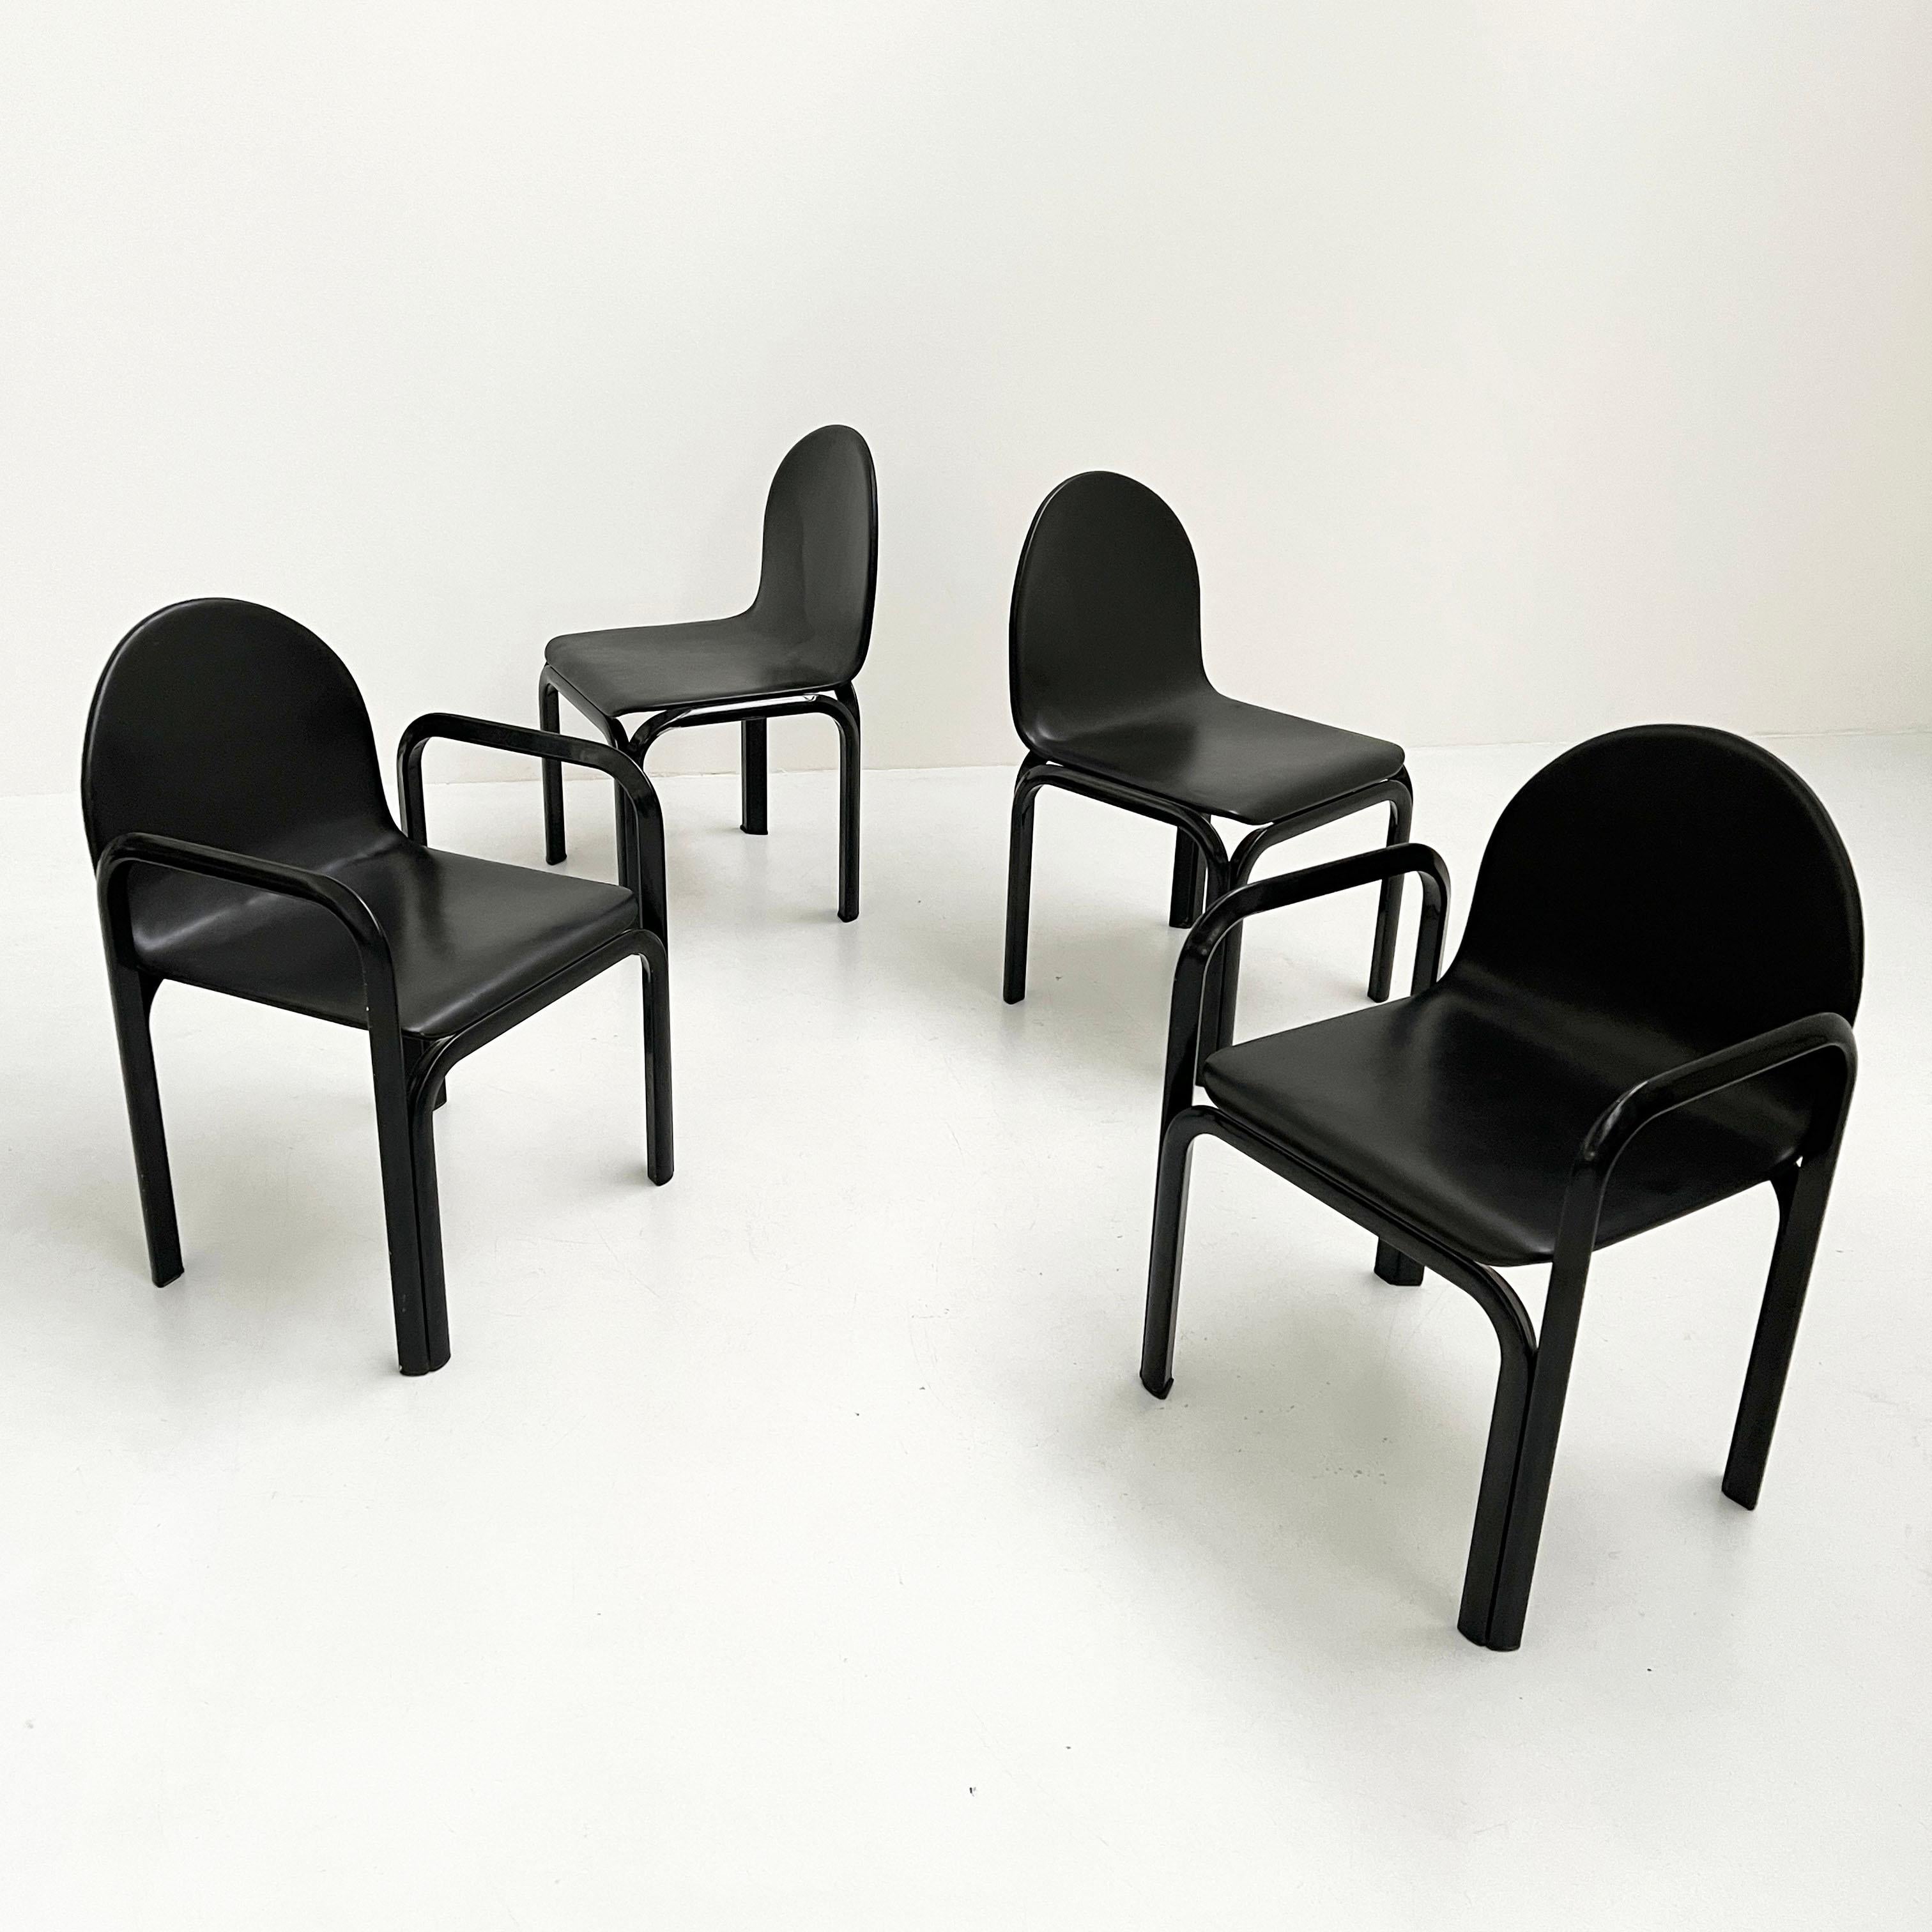 Designer - Gae Aulenti
Producer - Knoll
Model - Orsay Dining Chairs
Design Period - Seventies 
Measurements - width 57 cm x depth 47 cm x height 83 cm x seat height 45 cm
Materials - metal, leather
Color - Black
Condition - Good 
Comments -